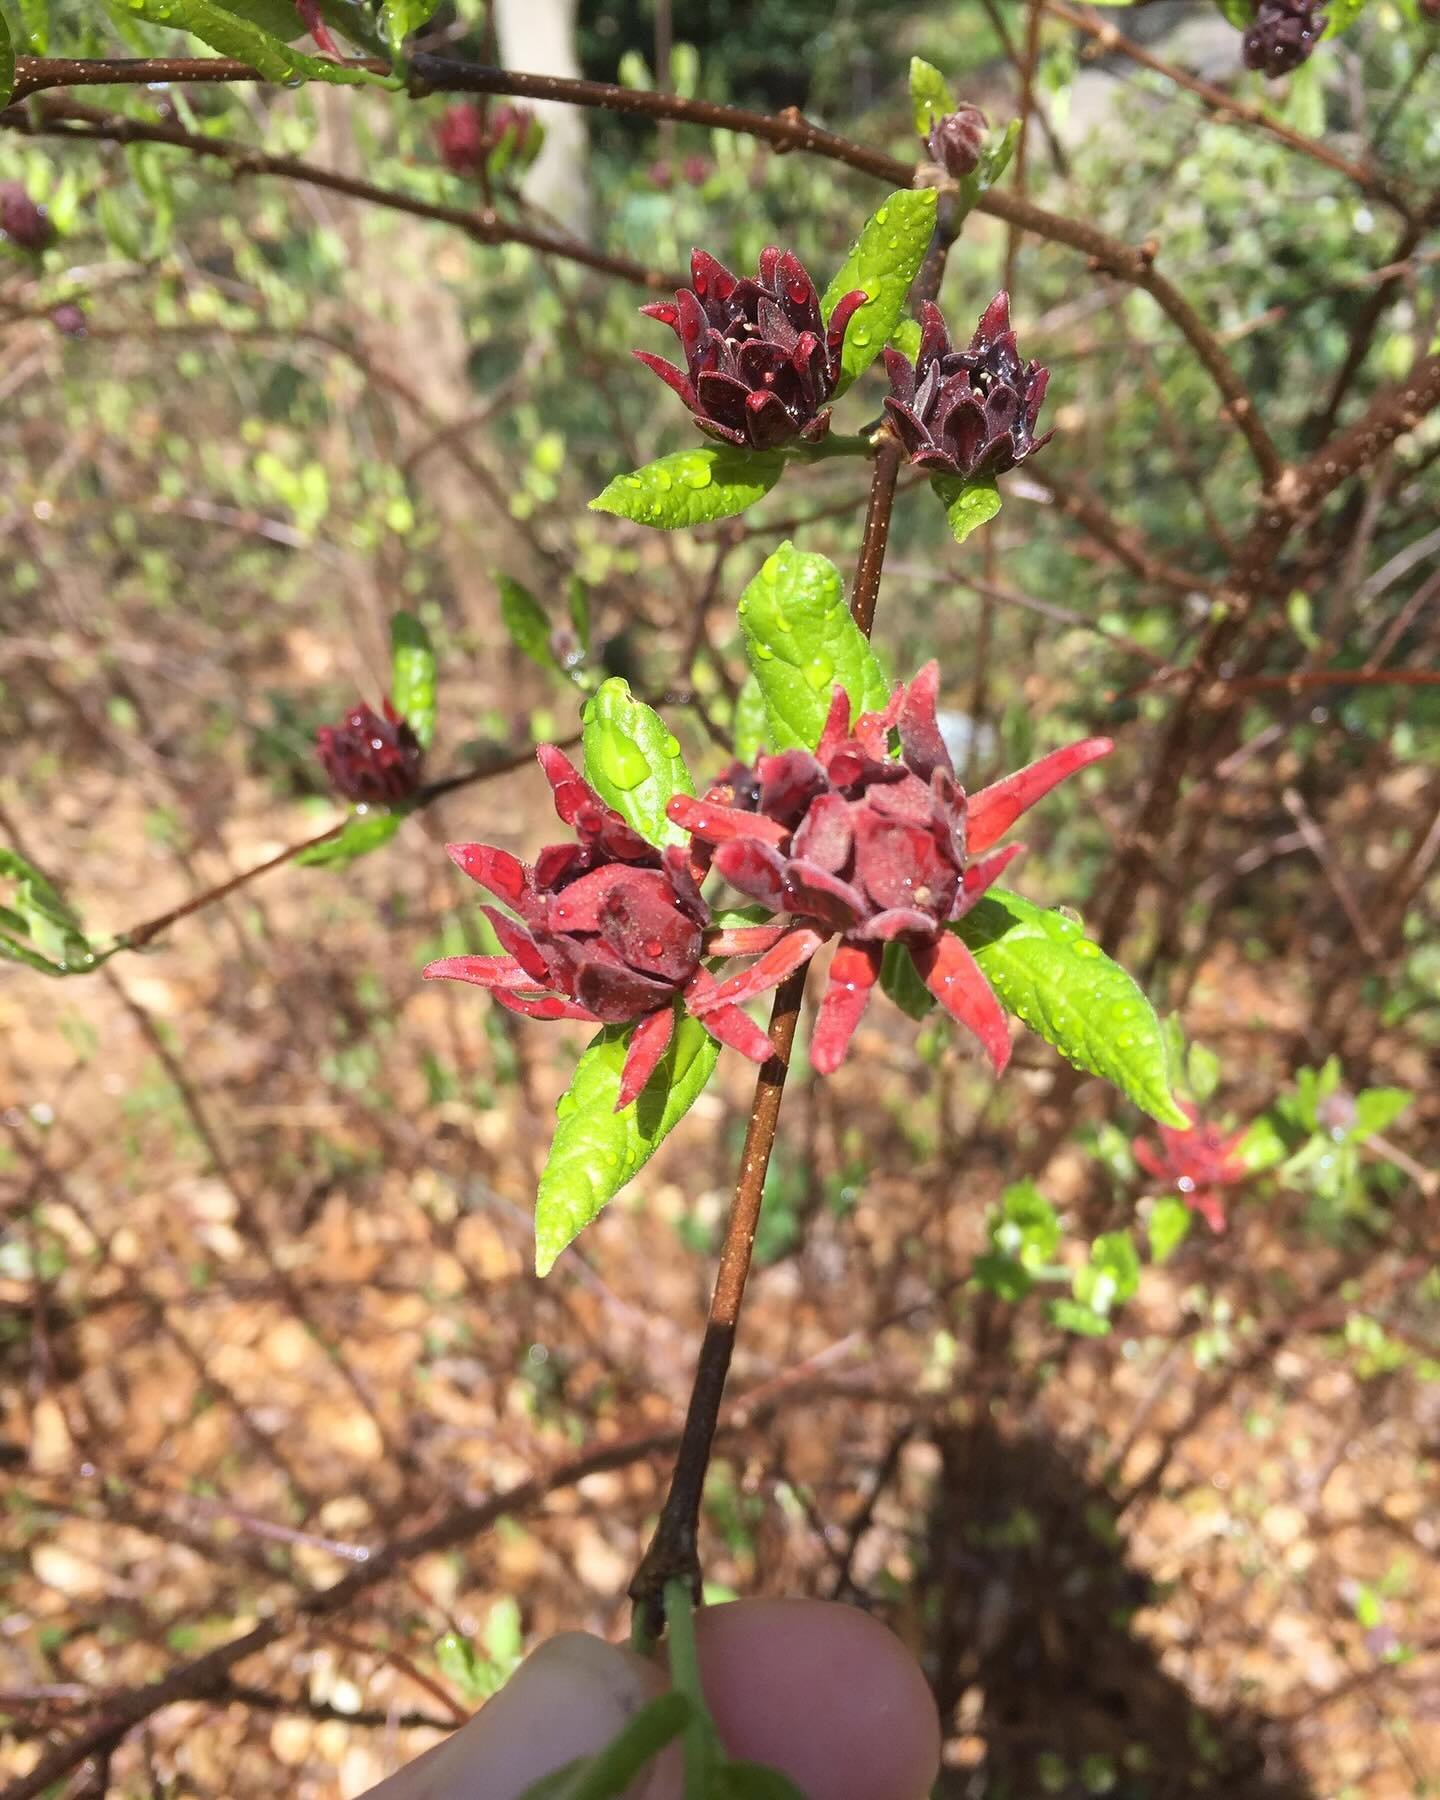 Found a gorgeous Carolina Allspice (Calycanthus floridus) on a client&rsquo;s property! Nature never fails to amaze. Need help nurturing your green treasures? We&rsquo;ve got your back! Reach out for top-notch tree care and plant healthcare services.